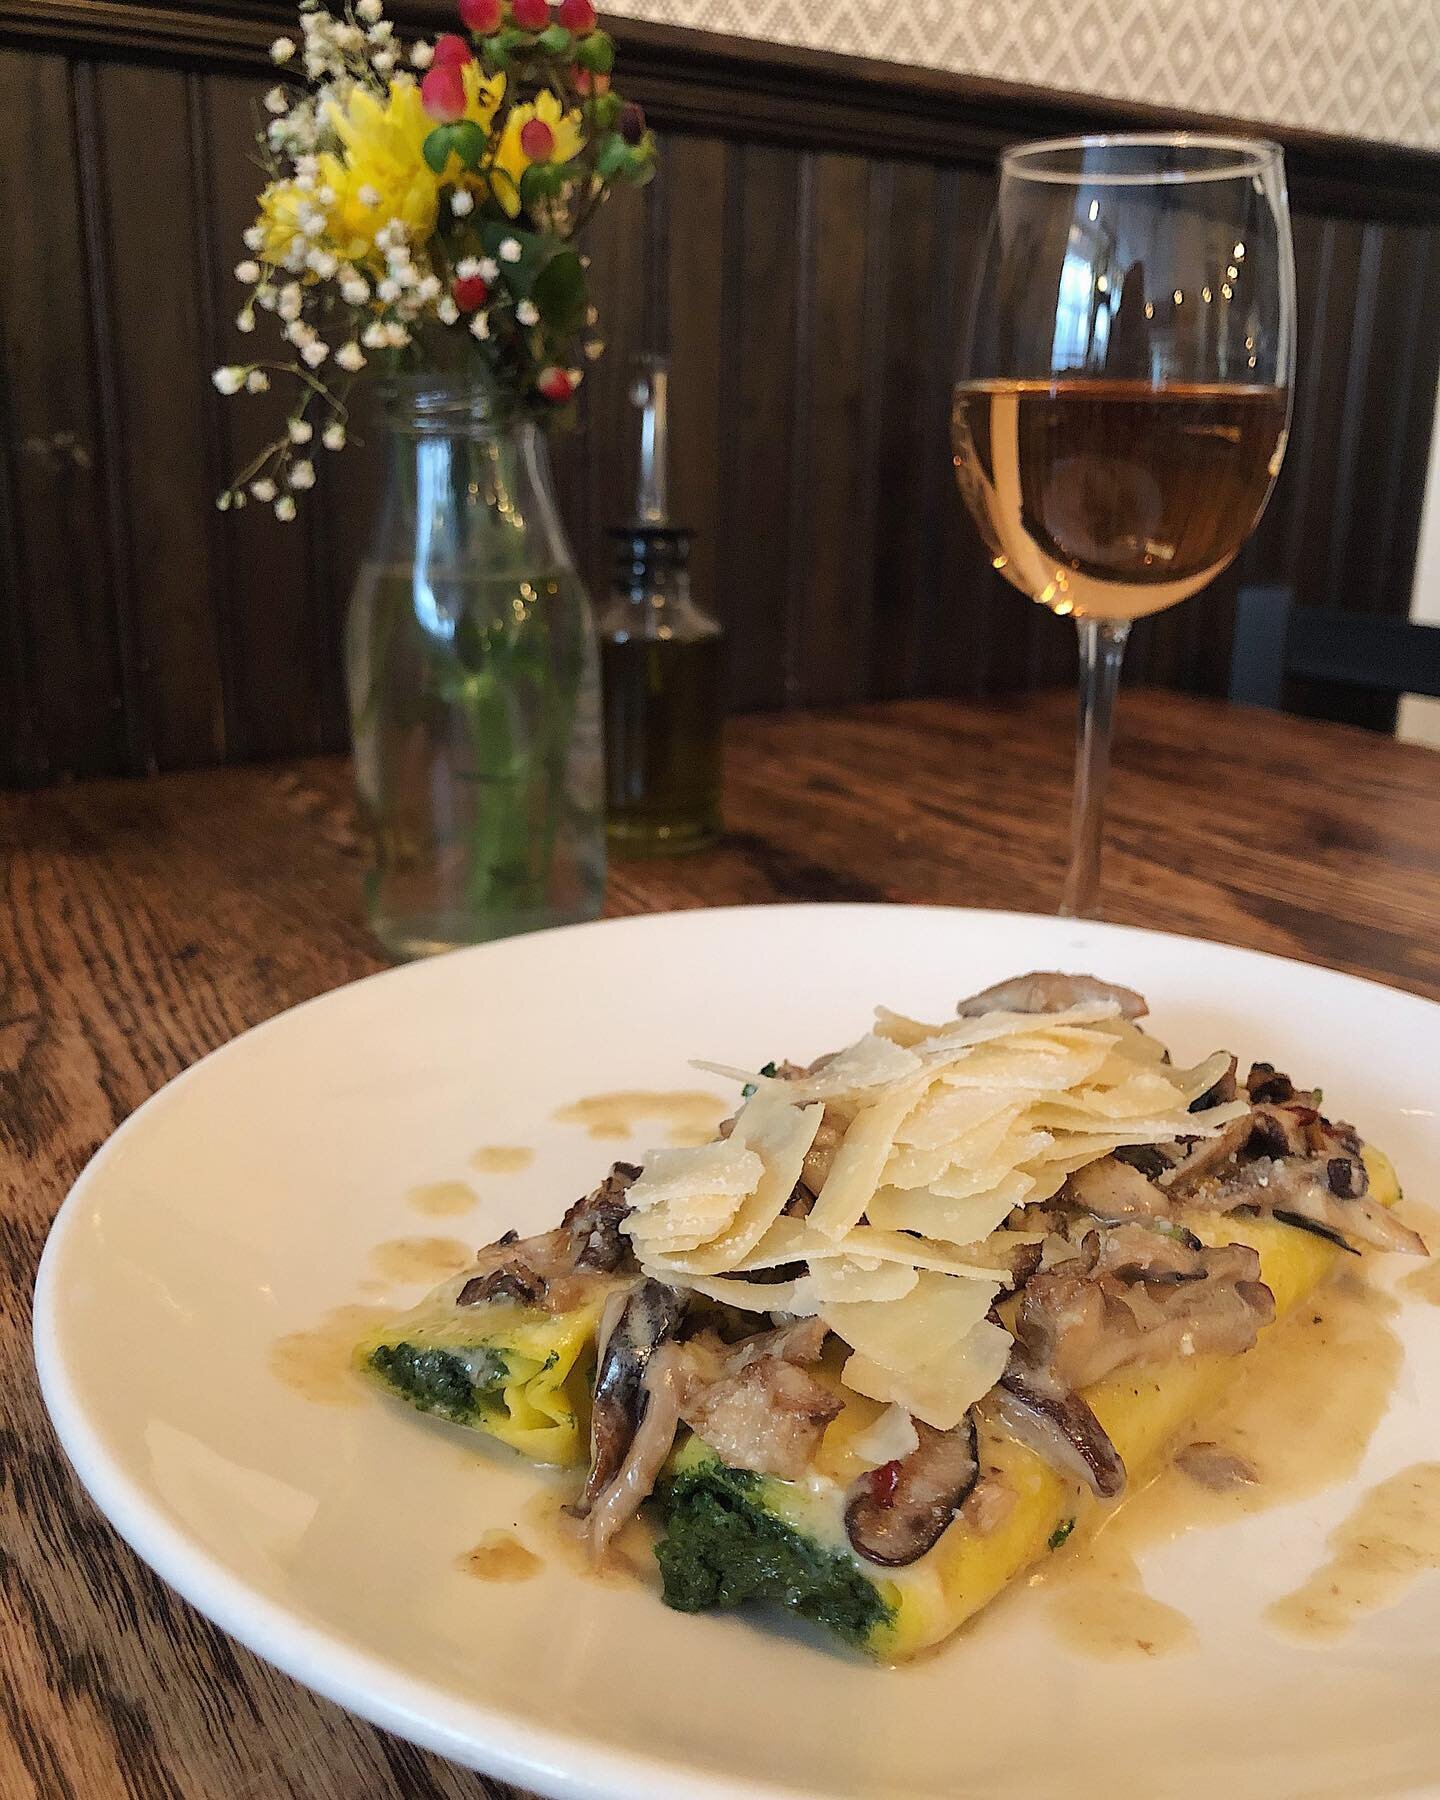 Spinach &amp; Ricotta Cannelloni with wild mushrooms and Parmigiano special👌🏻 ⠀ ⠀

Hurry up before it leaps away! ⠀ ⠀
#leapyear #specials #happysaturday #italianfood #trattoriaitaliana